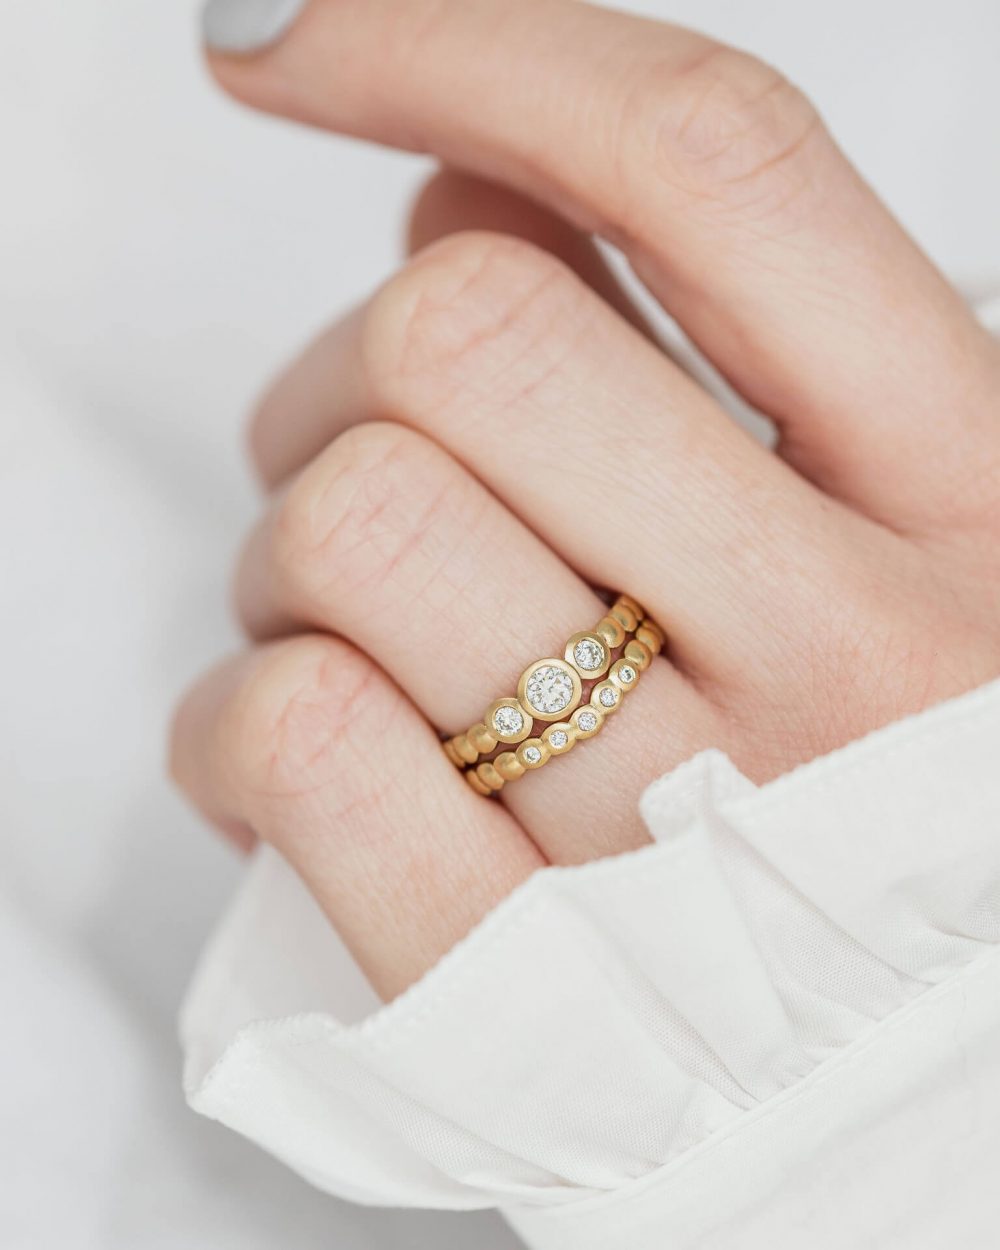 Trio Diamond Engagement Ring In Yellow Gold, Pictured On Model Stacked Above Matching Curved Diamond Wedding Ring. Designed By Bristol Jeweller Jacks Turner.